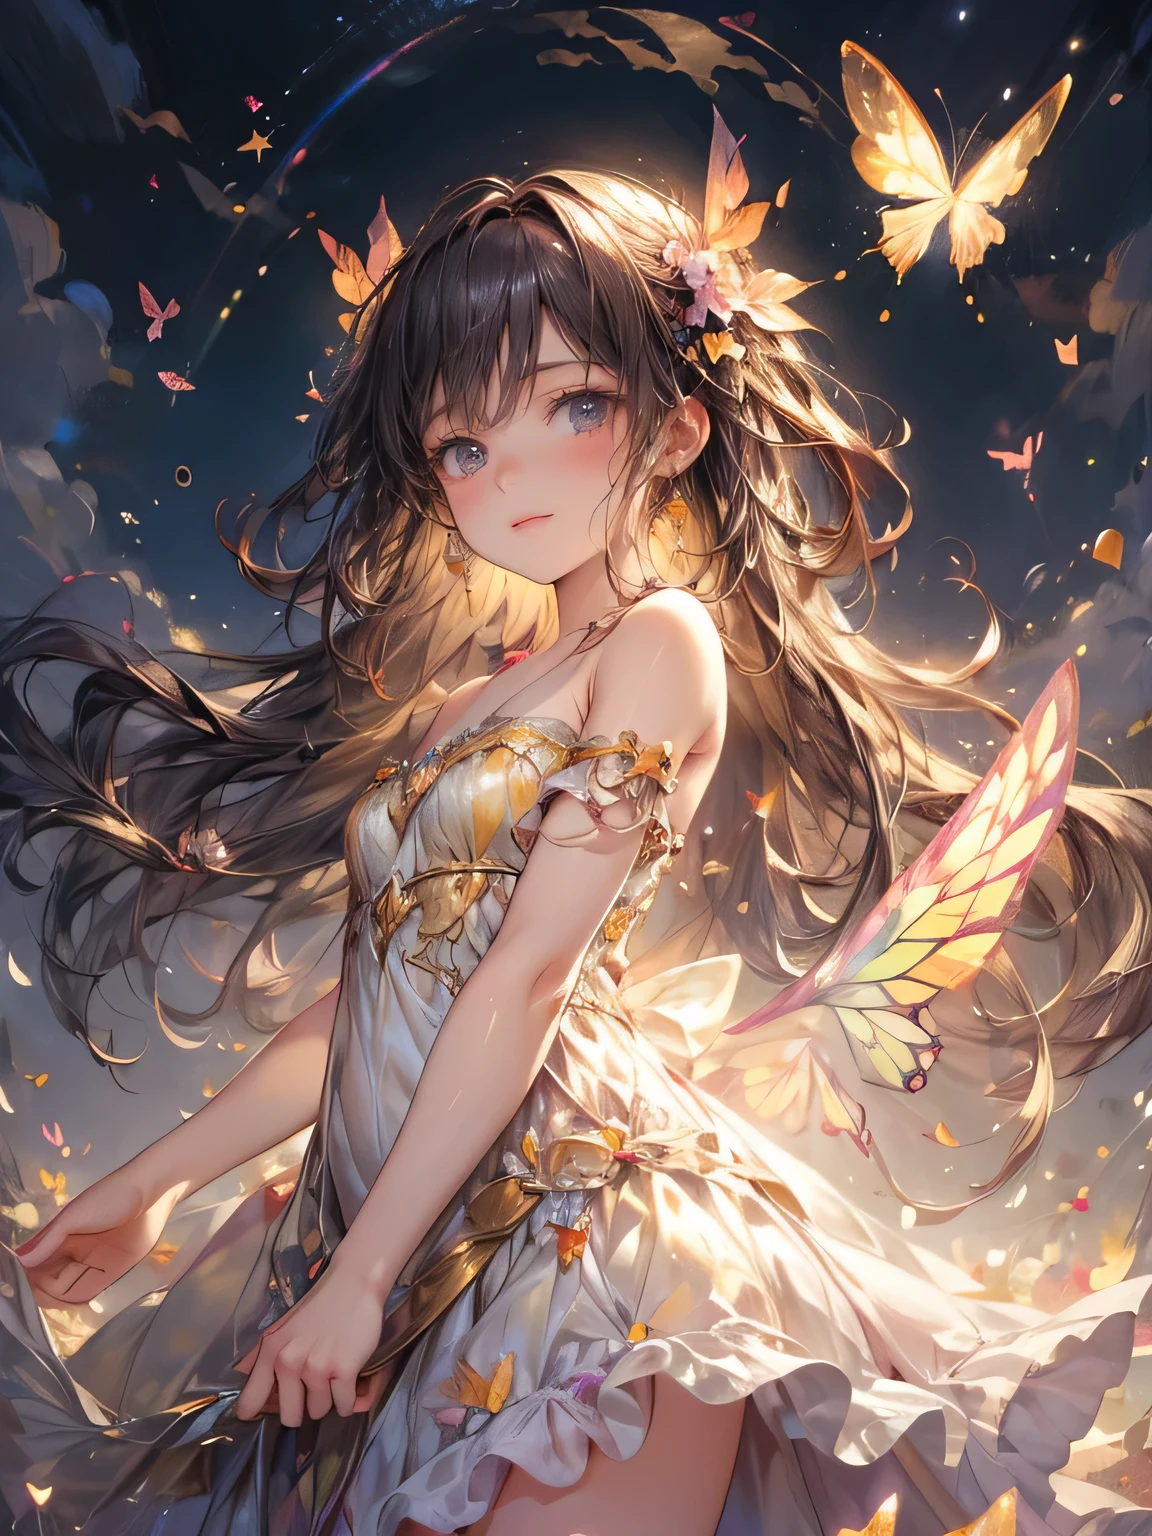 masterpiece, highest quality, 8k, highres, beautiful highest details, soft sunlight, butterfly spirit girl, in flower garden, yellow dress, bare shoulder, strapless, tears, rainbow butterfly wings:1.2, flying sky:1.2, view from below, delicate eyes, sparkling eyes, bright rosy lips, gentle smile, looking up at the sky, 